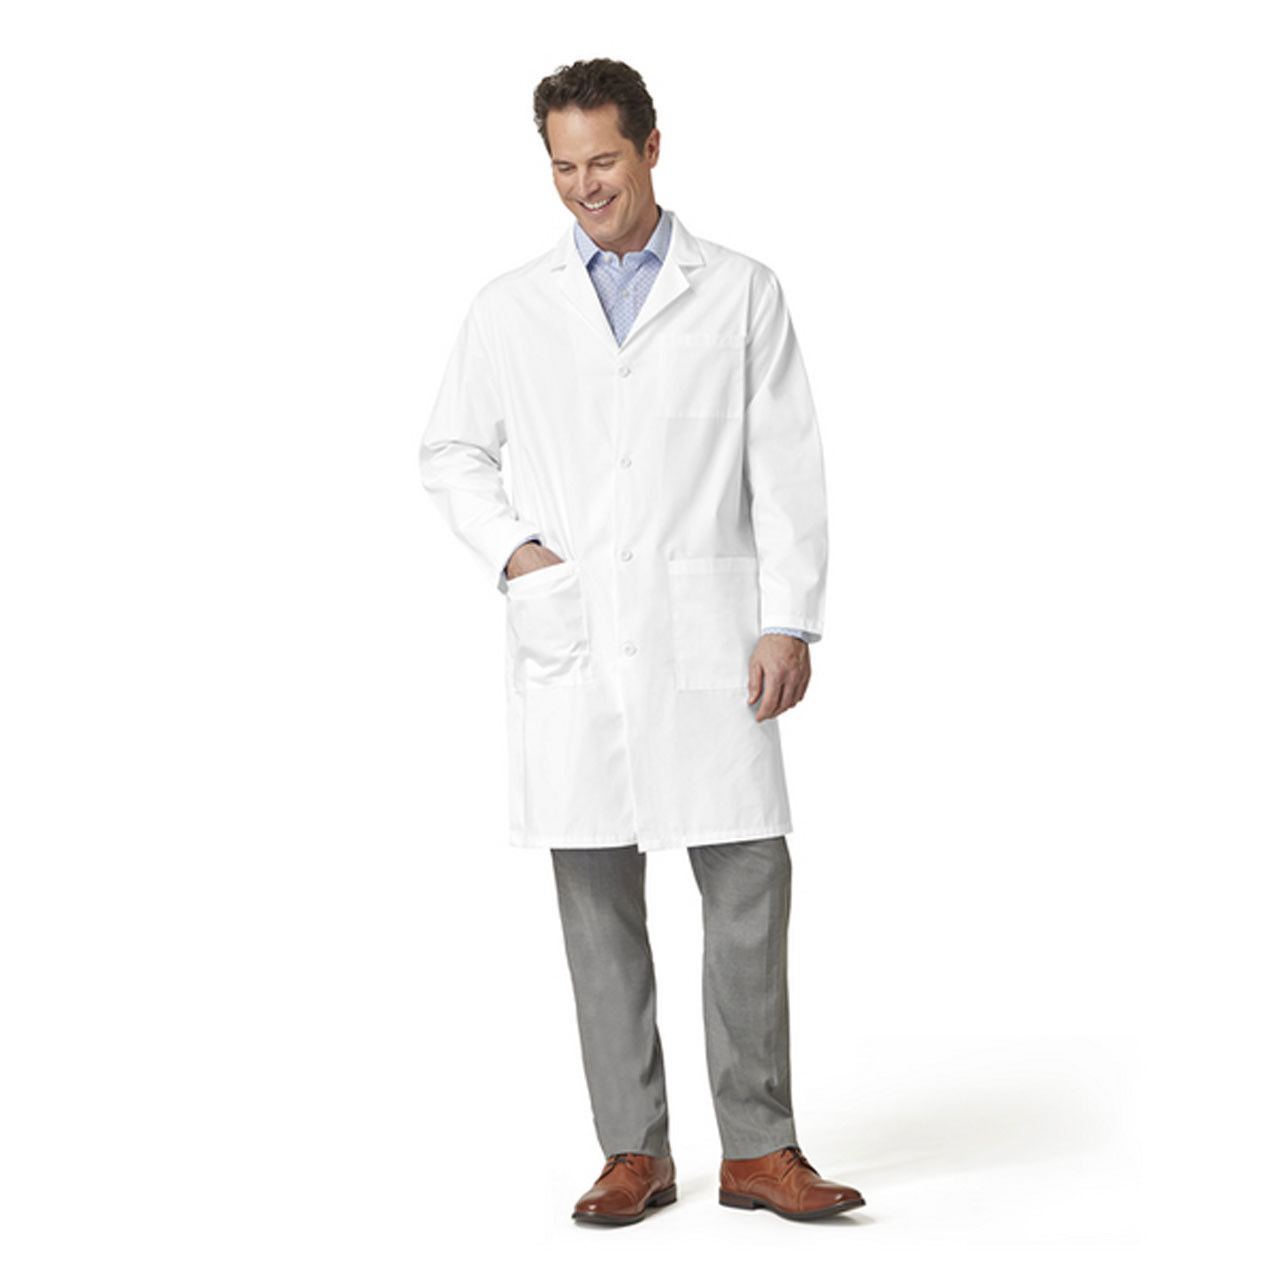 What's the color of the unisex lab coats by Fashion Seal?